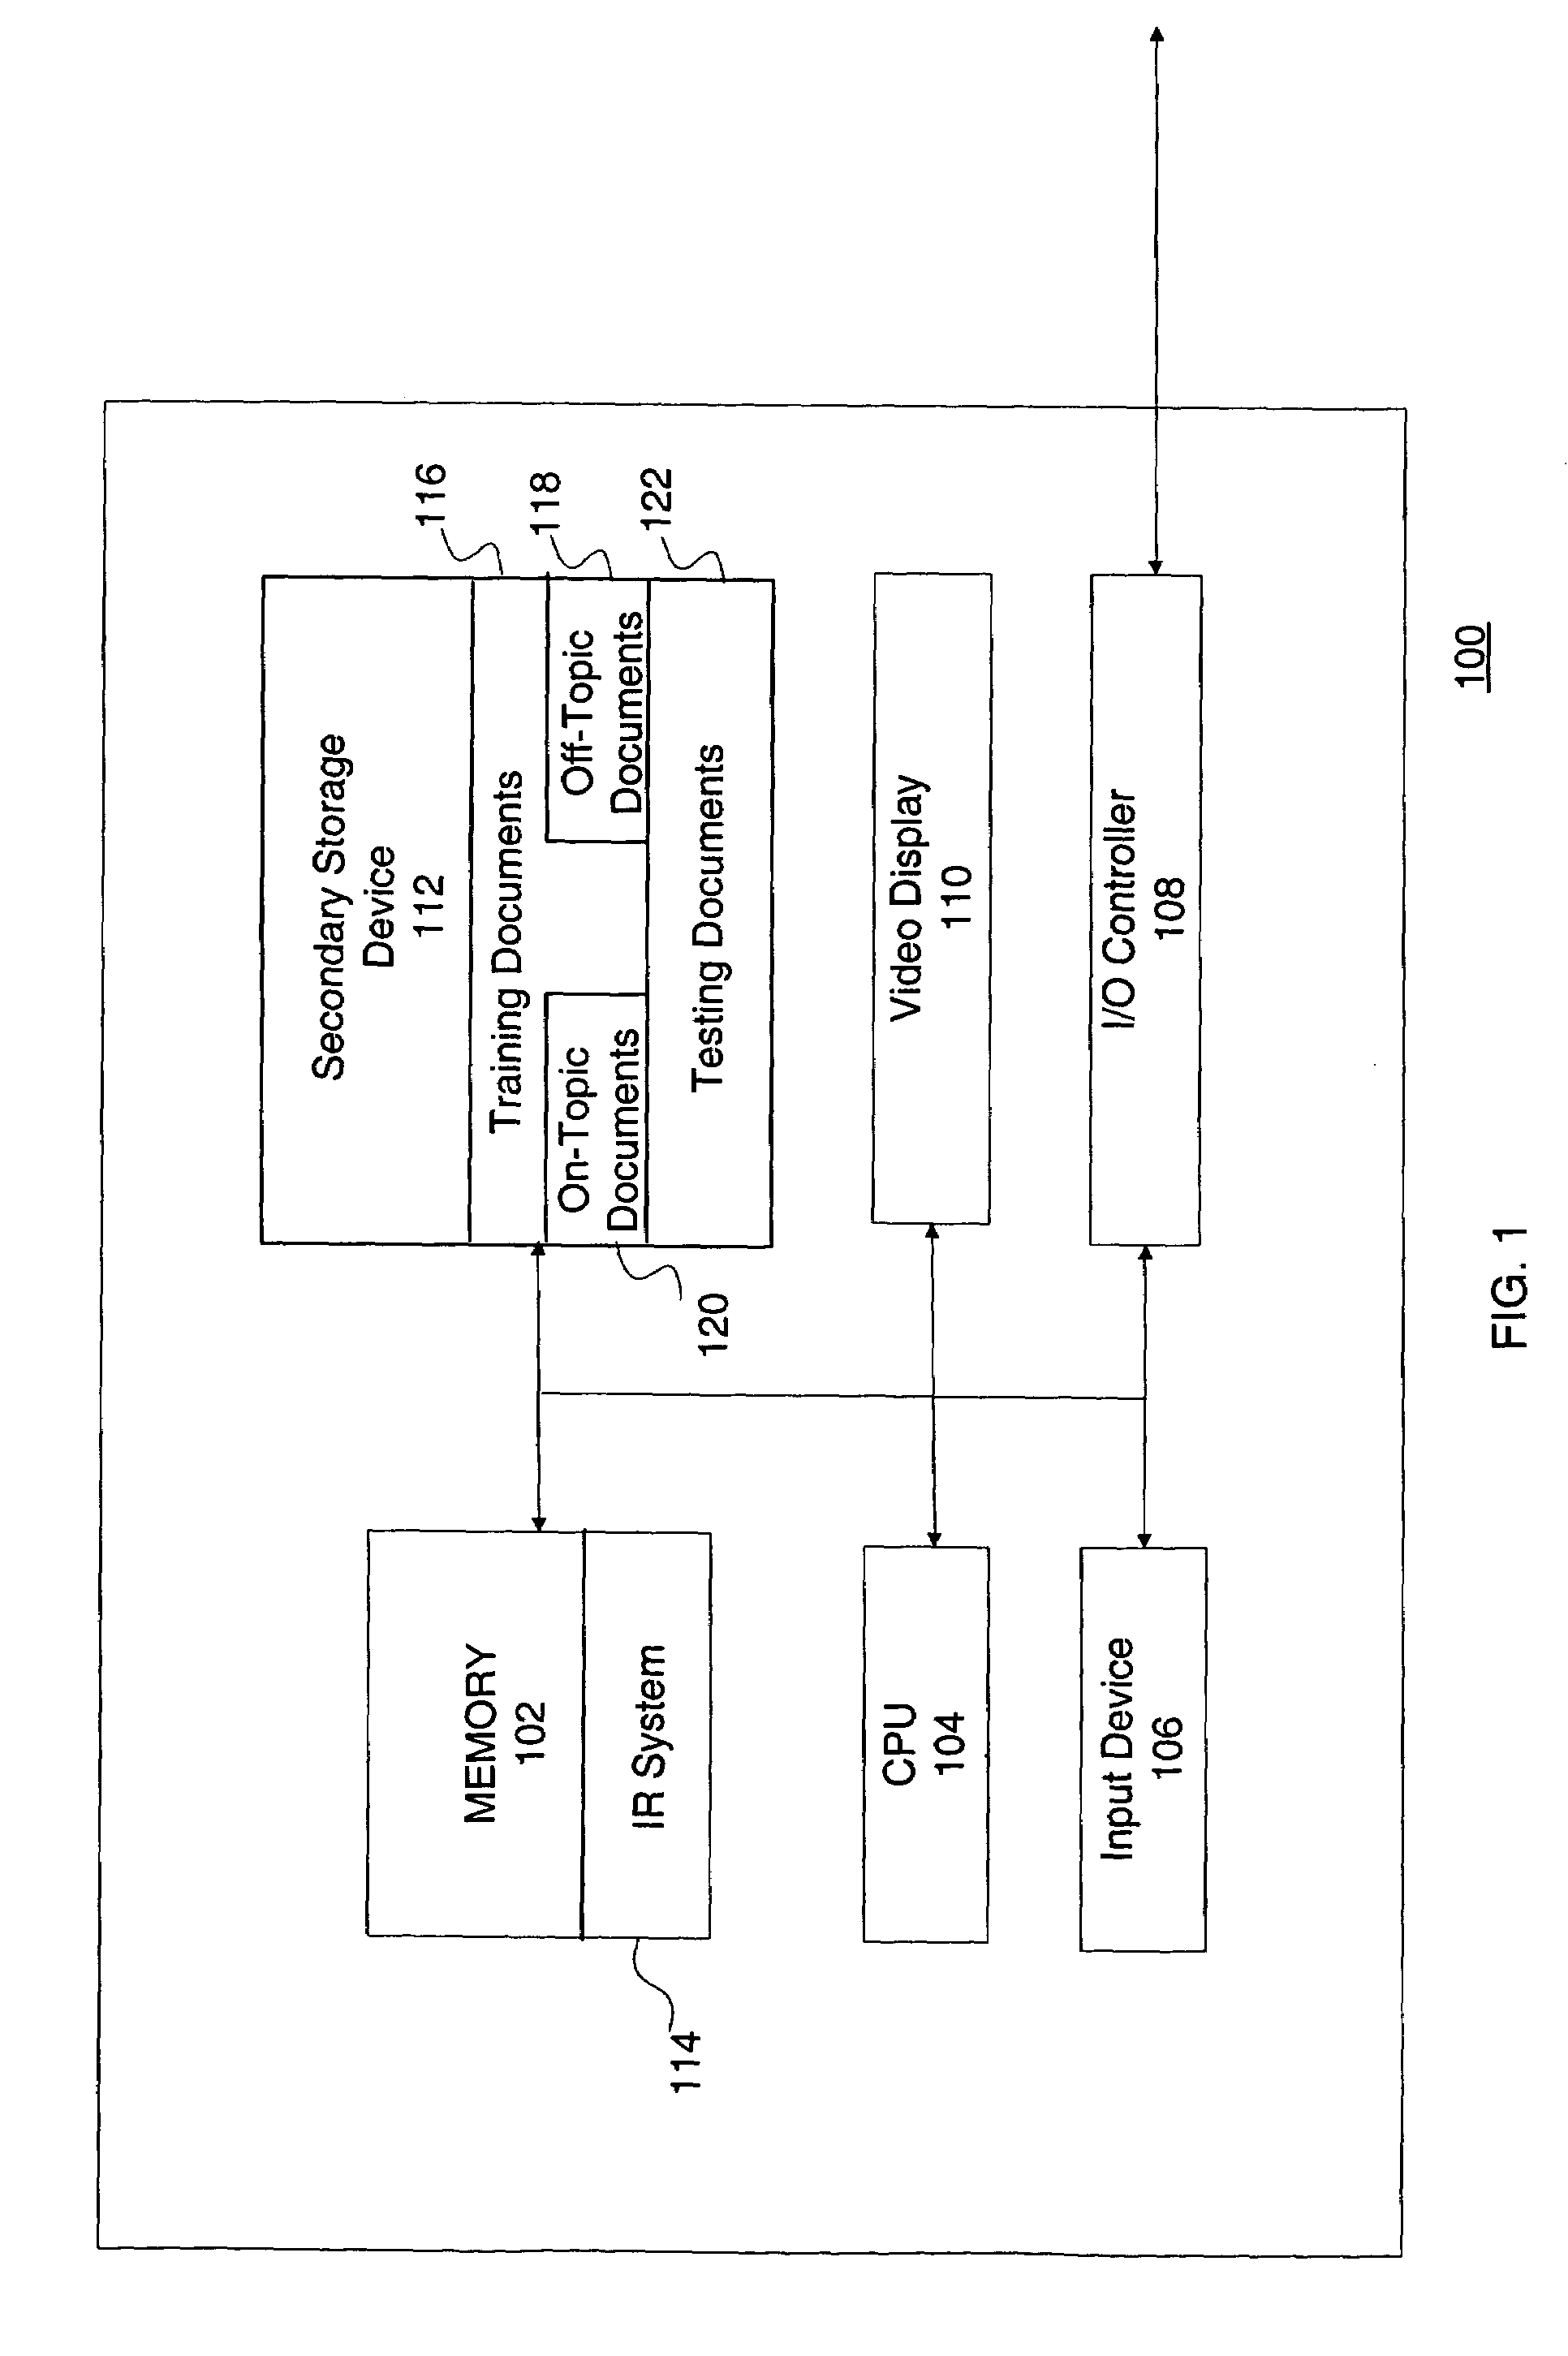 Method and apparatus for score normalization for information retrieval applications